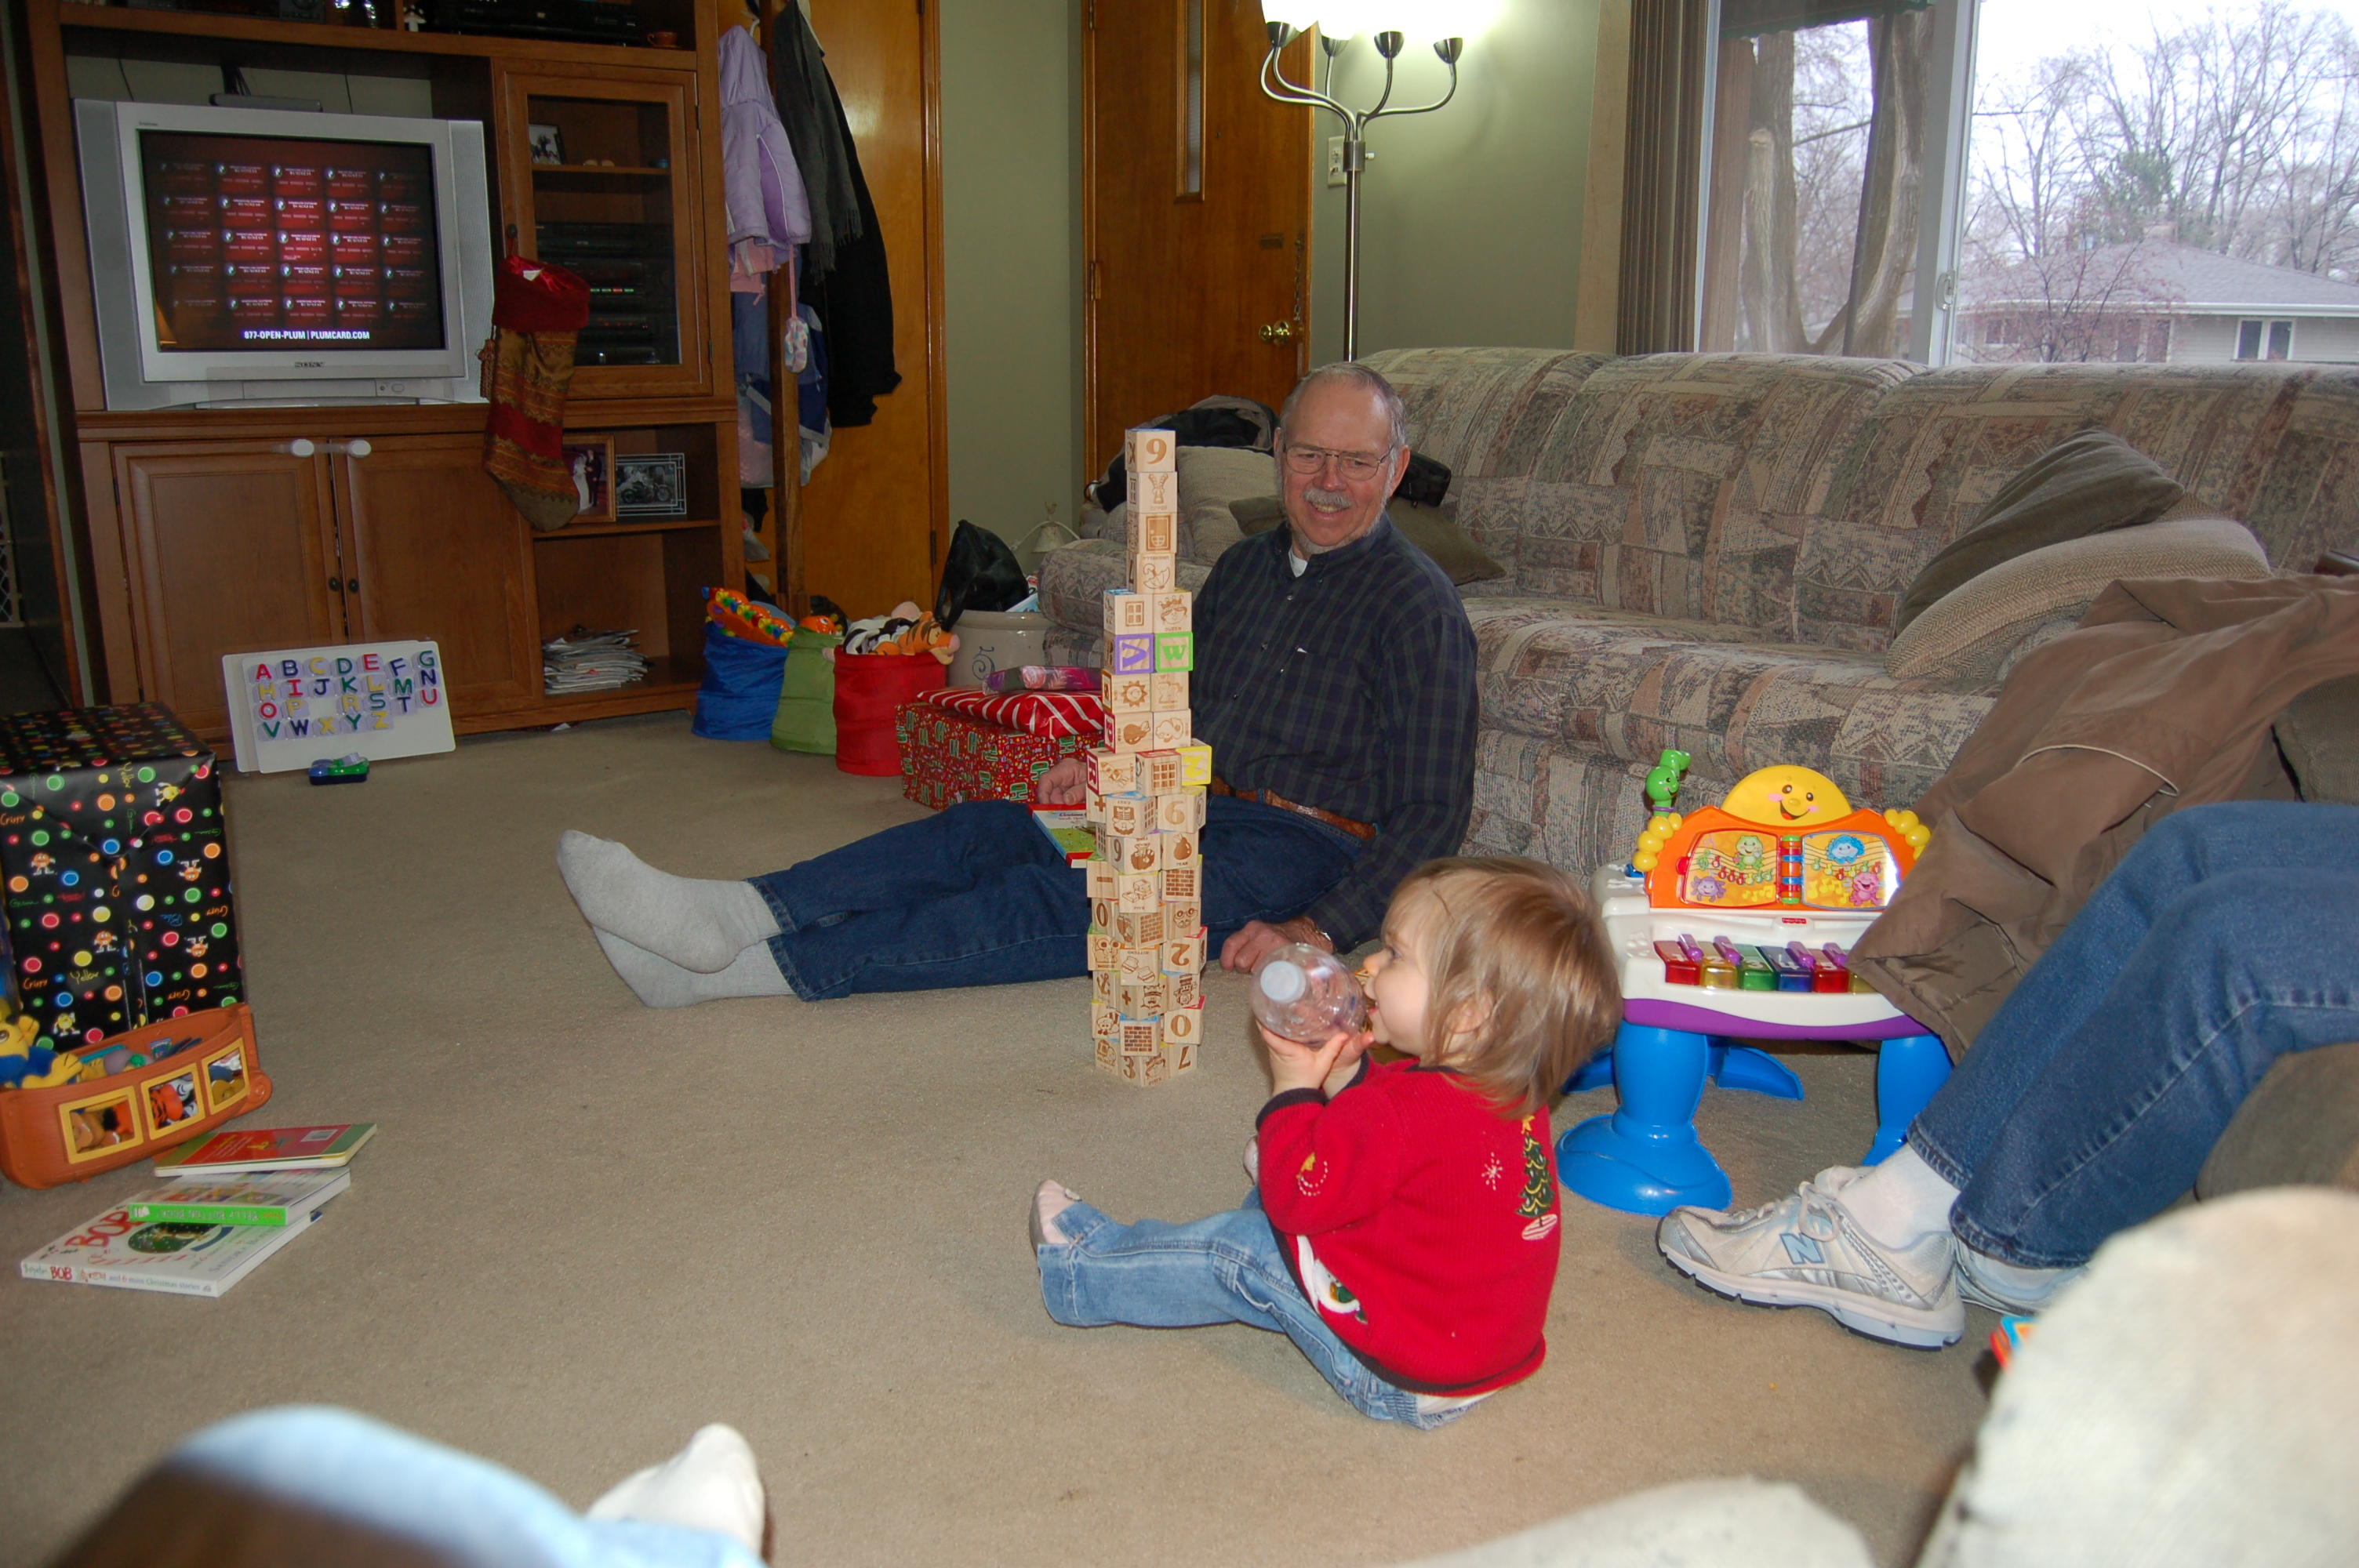 Grampa makes great towers!